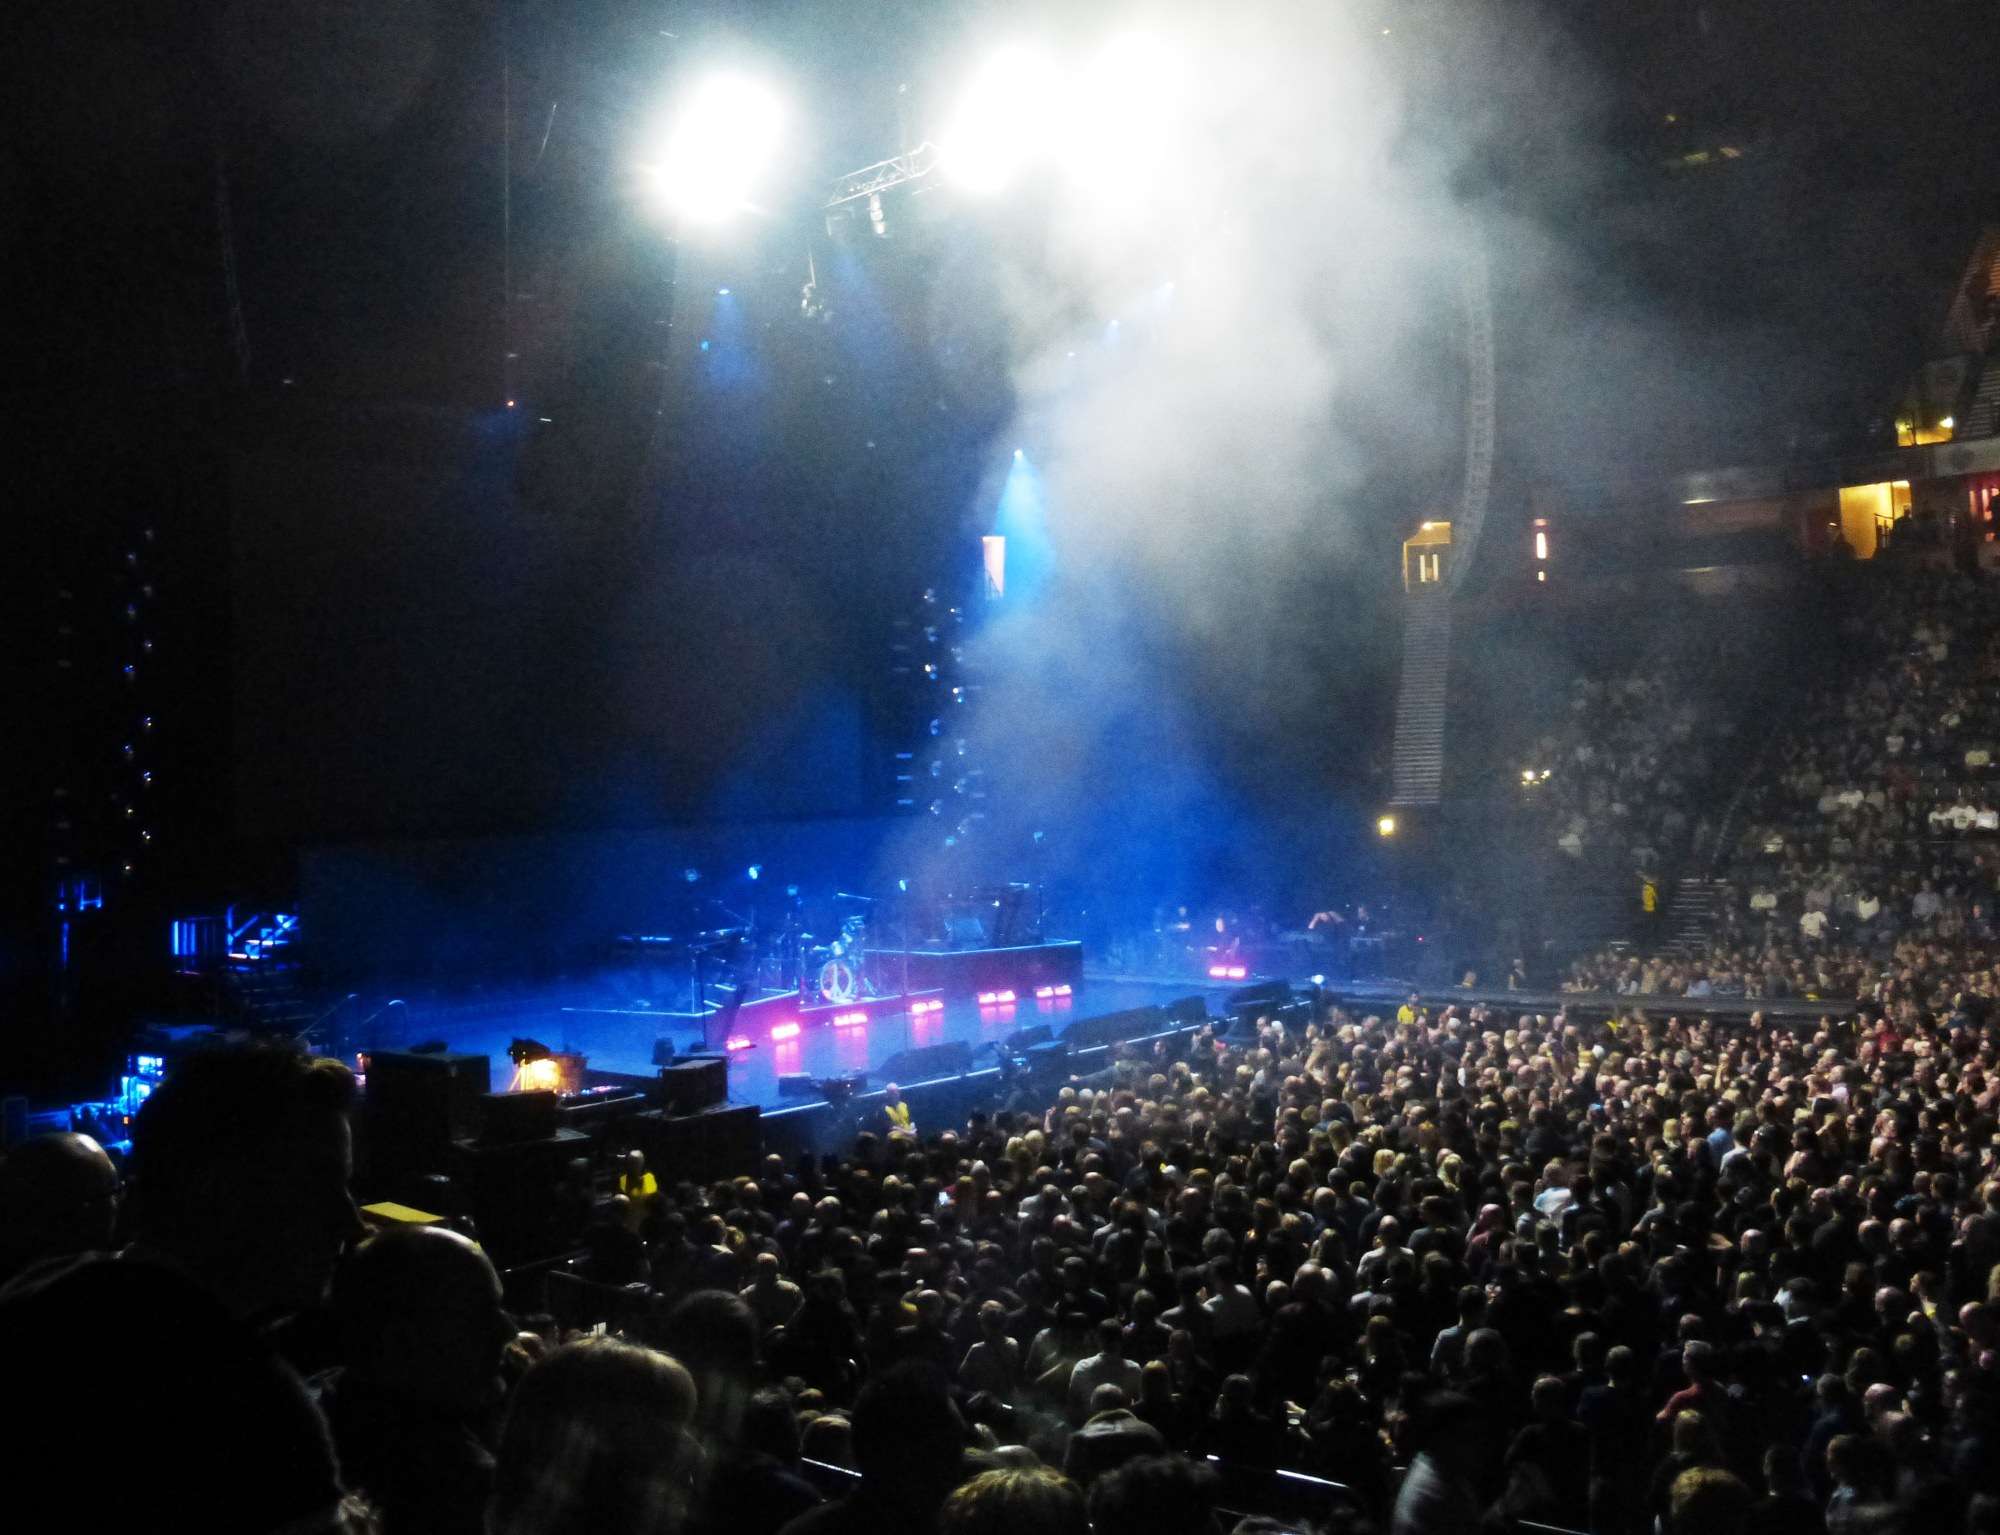 View of Depeche Mode at Manchester Arena from Seat Block 103